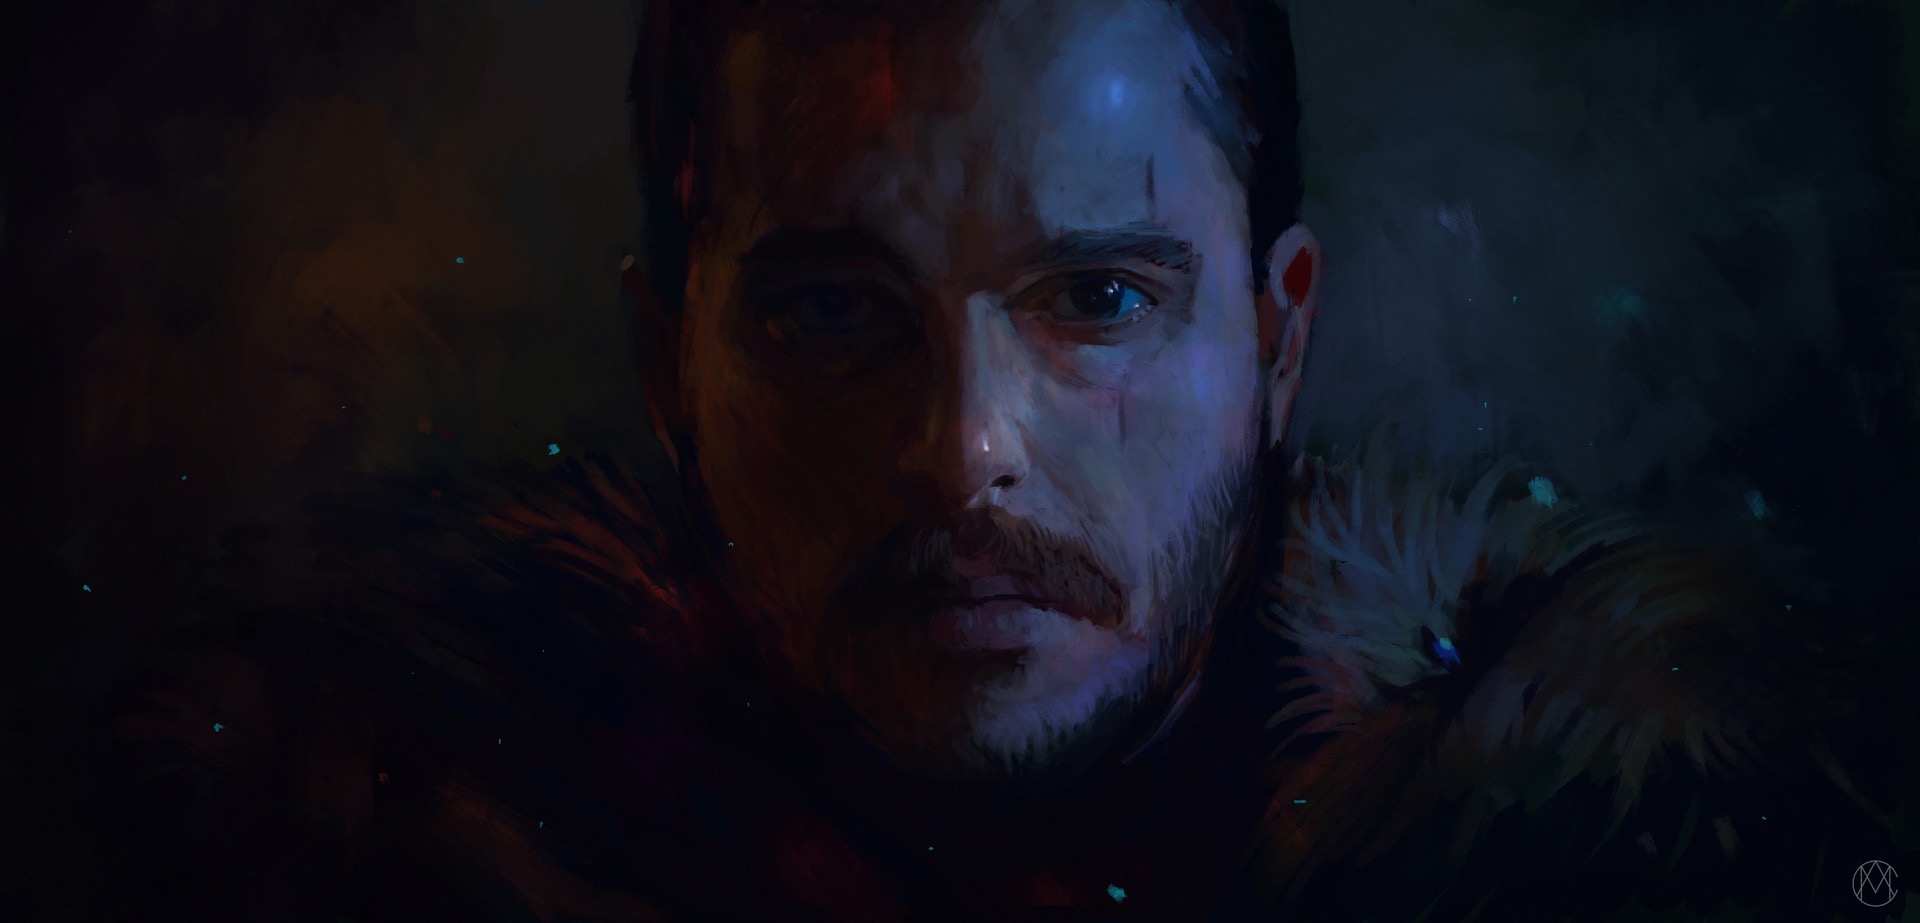 Jon Snow, Aegon Targaryen, A Song of Ice and Fire, Game of Thrones, Portrait, Painting Wallpaper